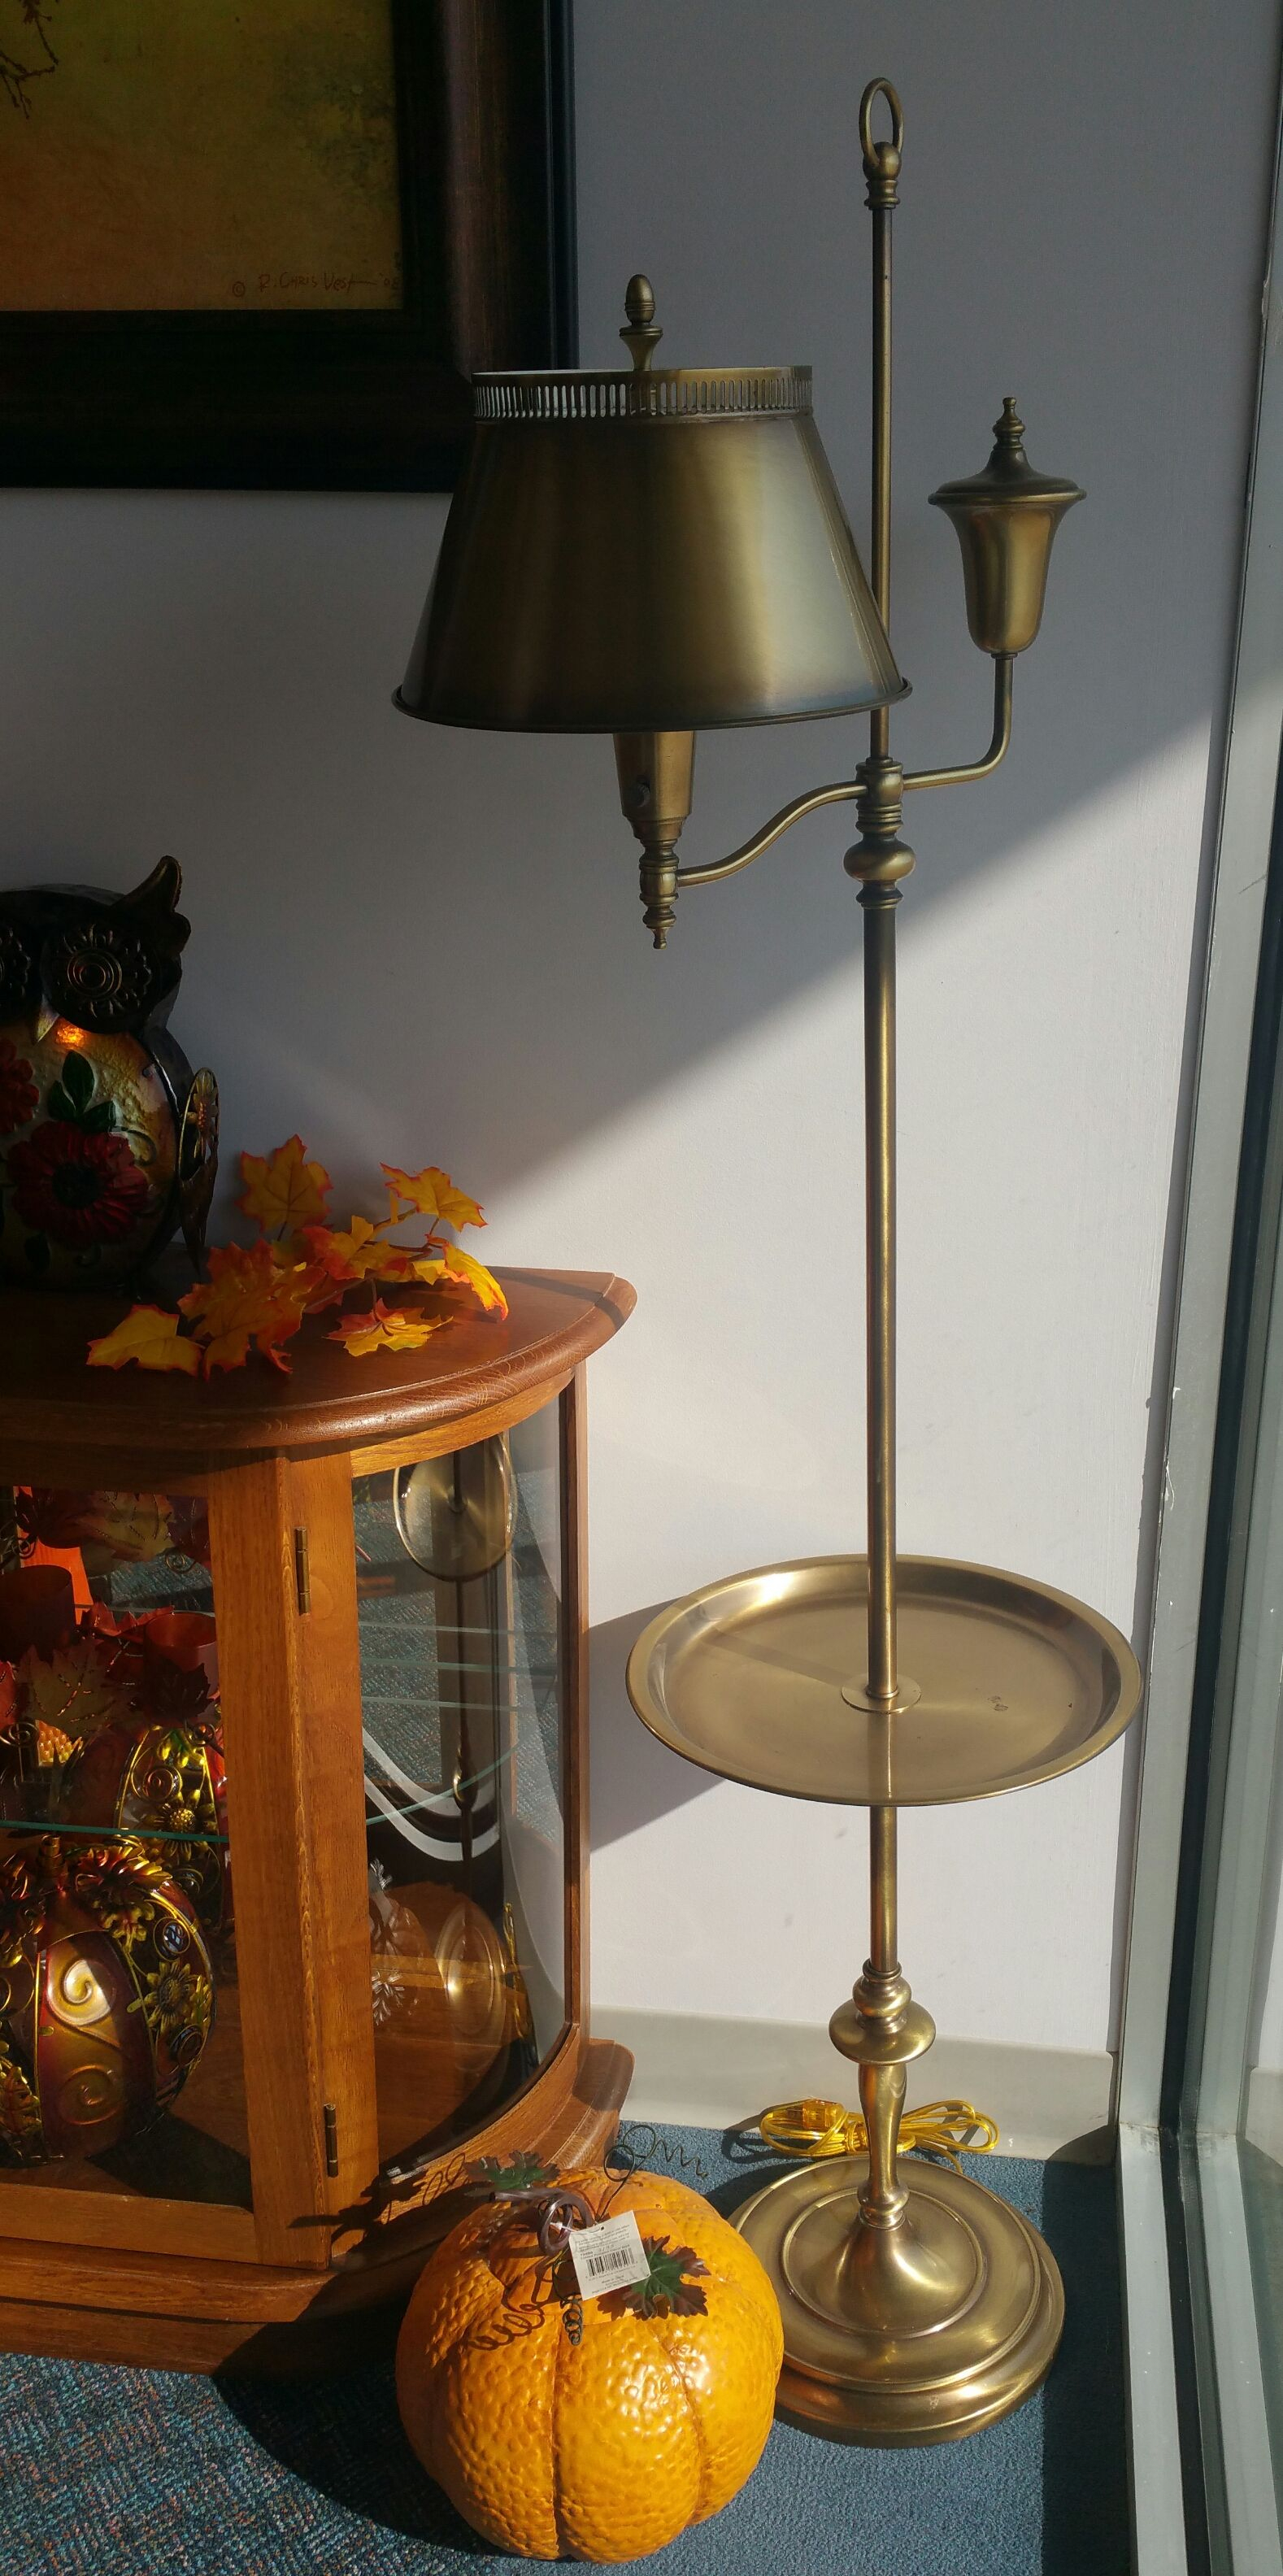 Antique Brass Tole Floor Lamp With Attached Tray Still Has intended for size 1578 X 3168